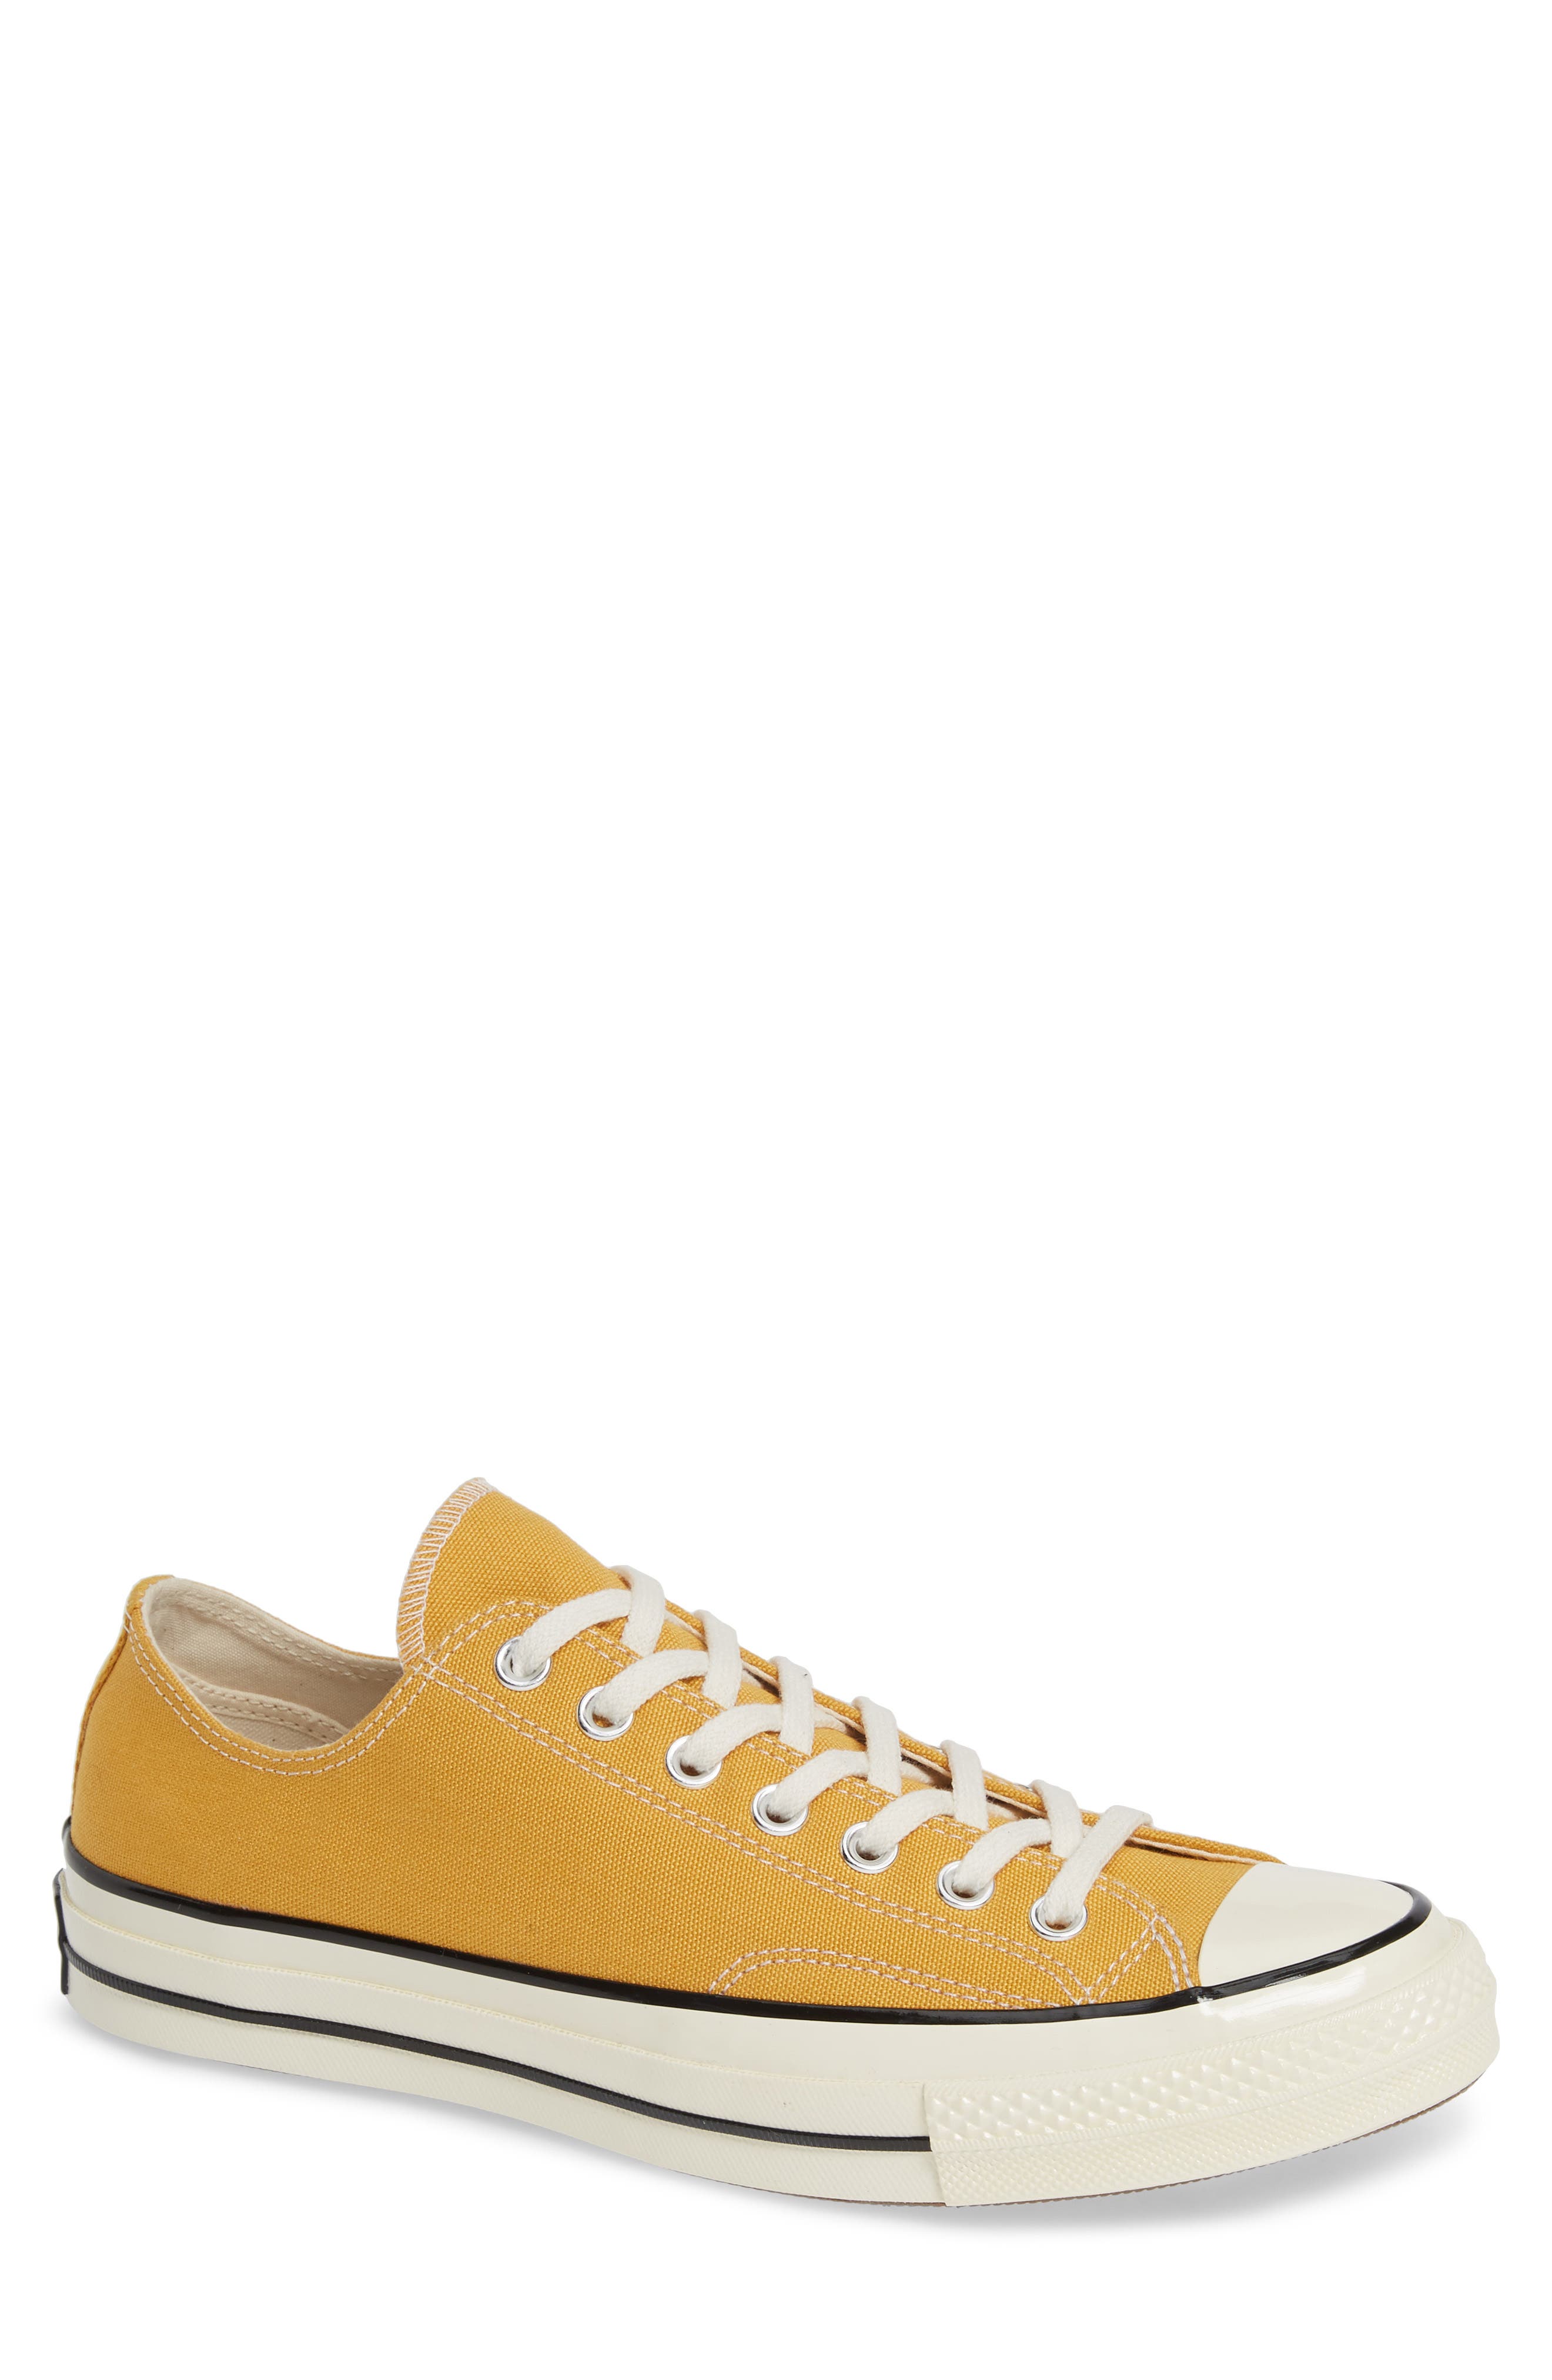 yellow converse all star